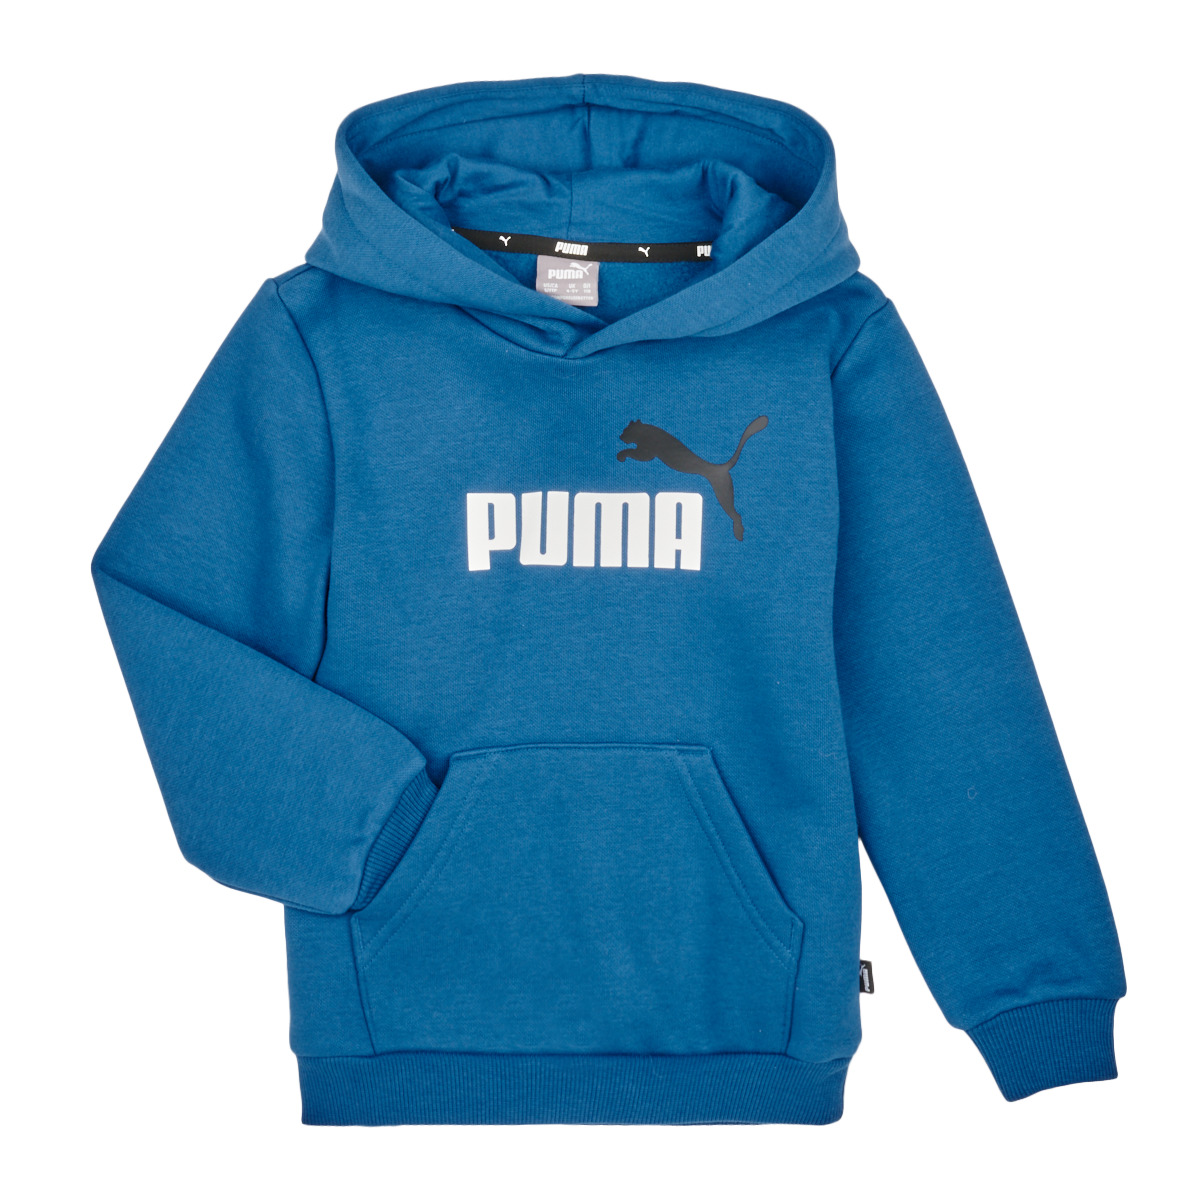 Child Europe Fast Spartoo sweaters ! - COL delivery 2 | LOGO HOODIE ESS - € Puma Clothing BIG 26,40 Blue